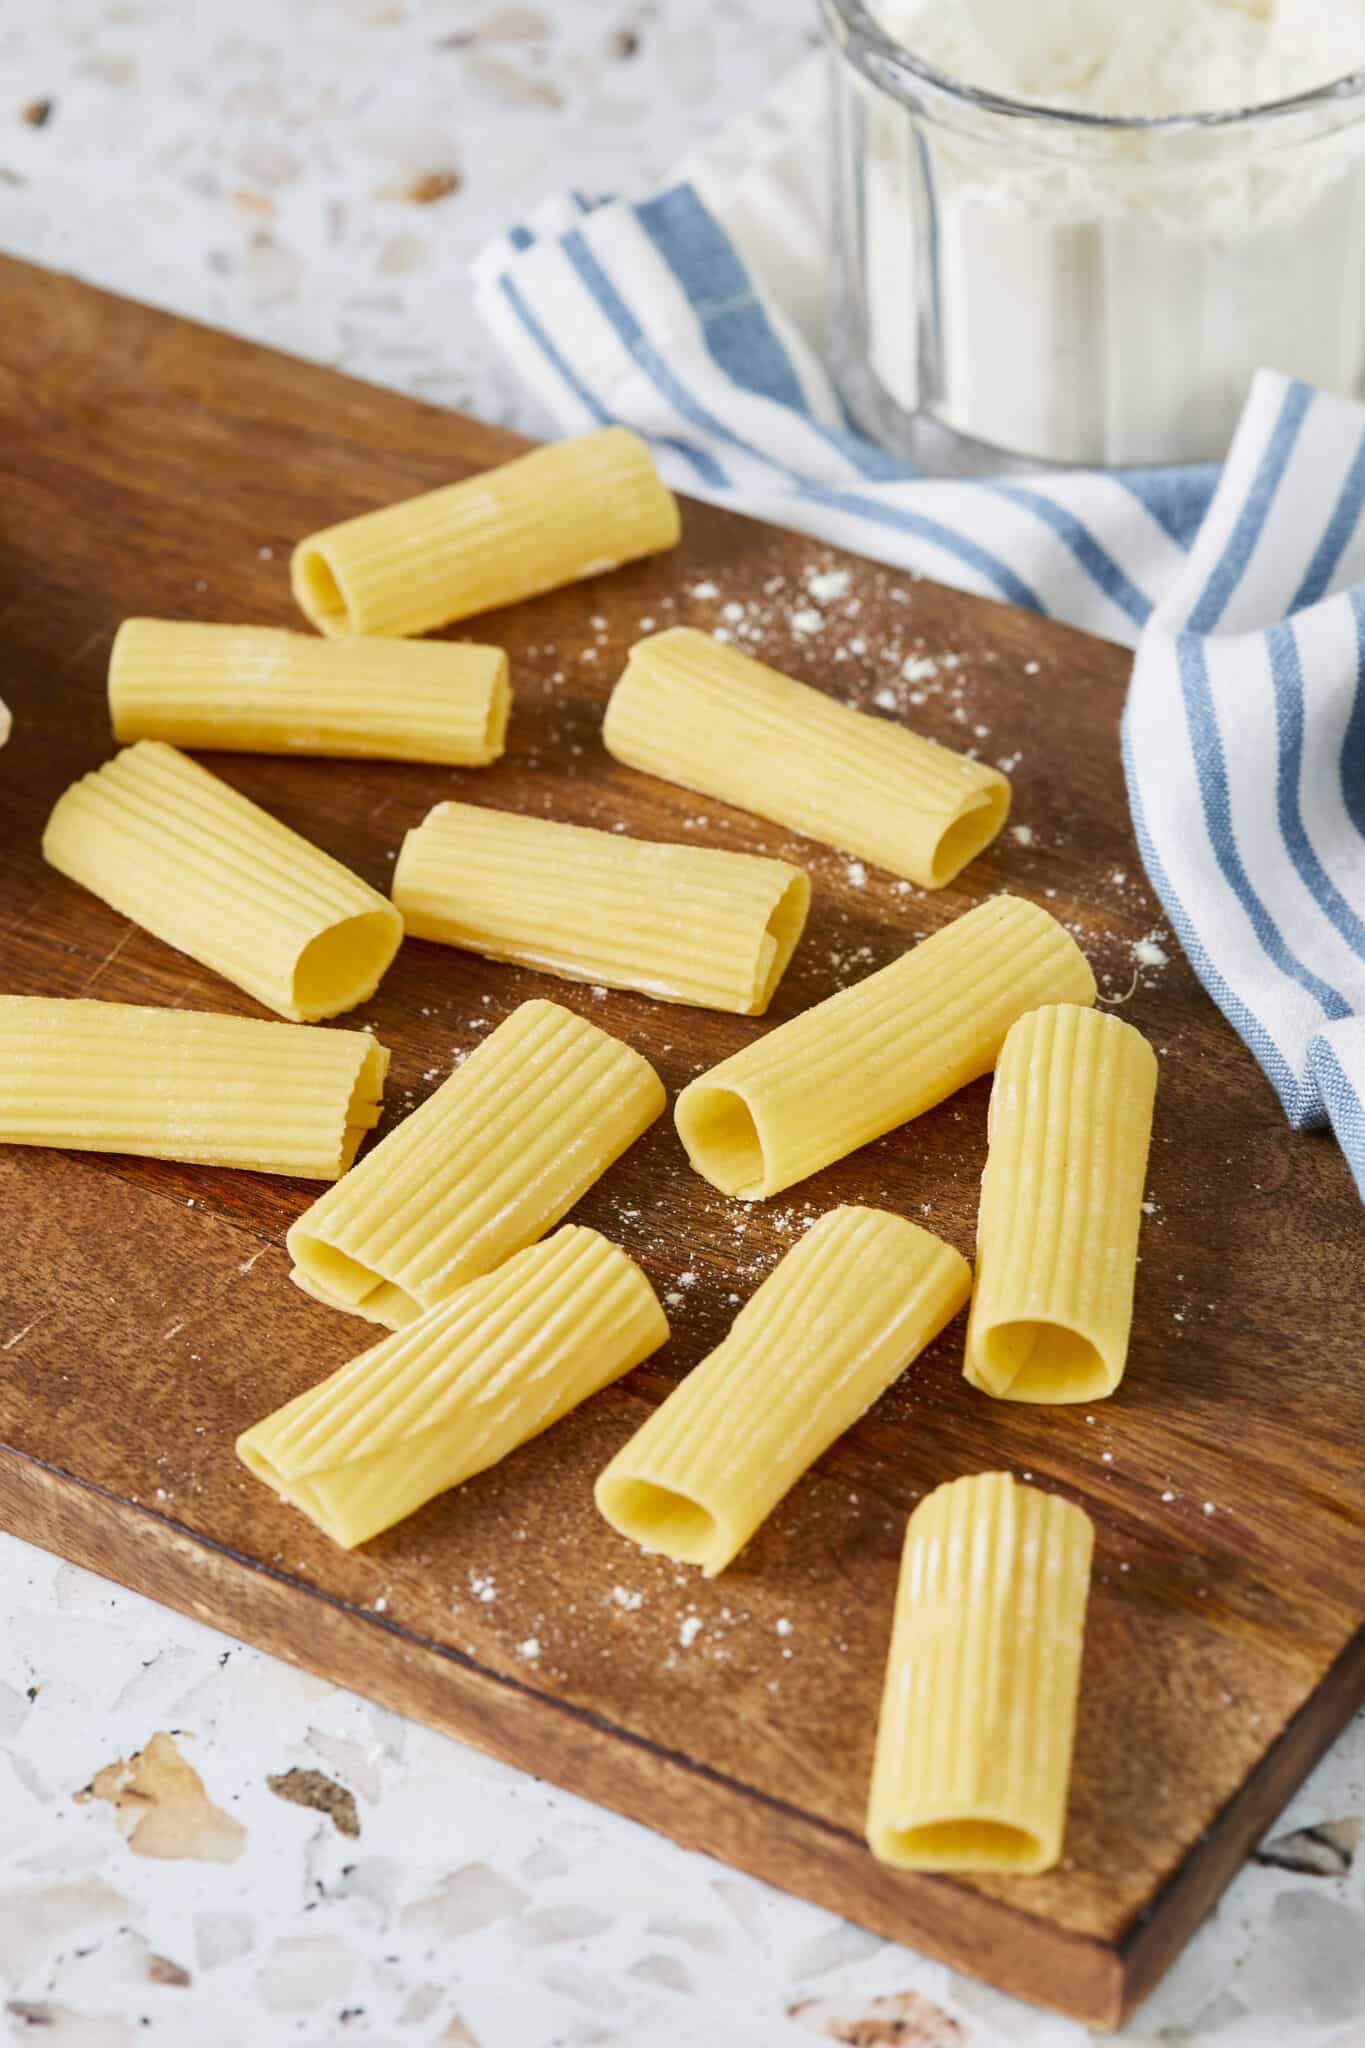 Rigatoni pasta is drying on a wooden board. It's in ridged, tubular shape and about 2 inches long with squared-off ends. It got the yellow color from semolina flour. 